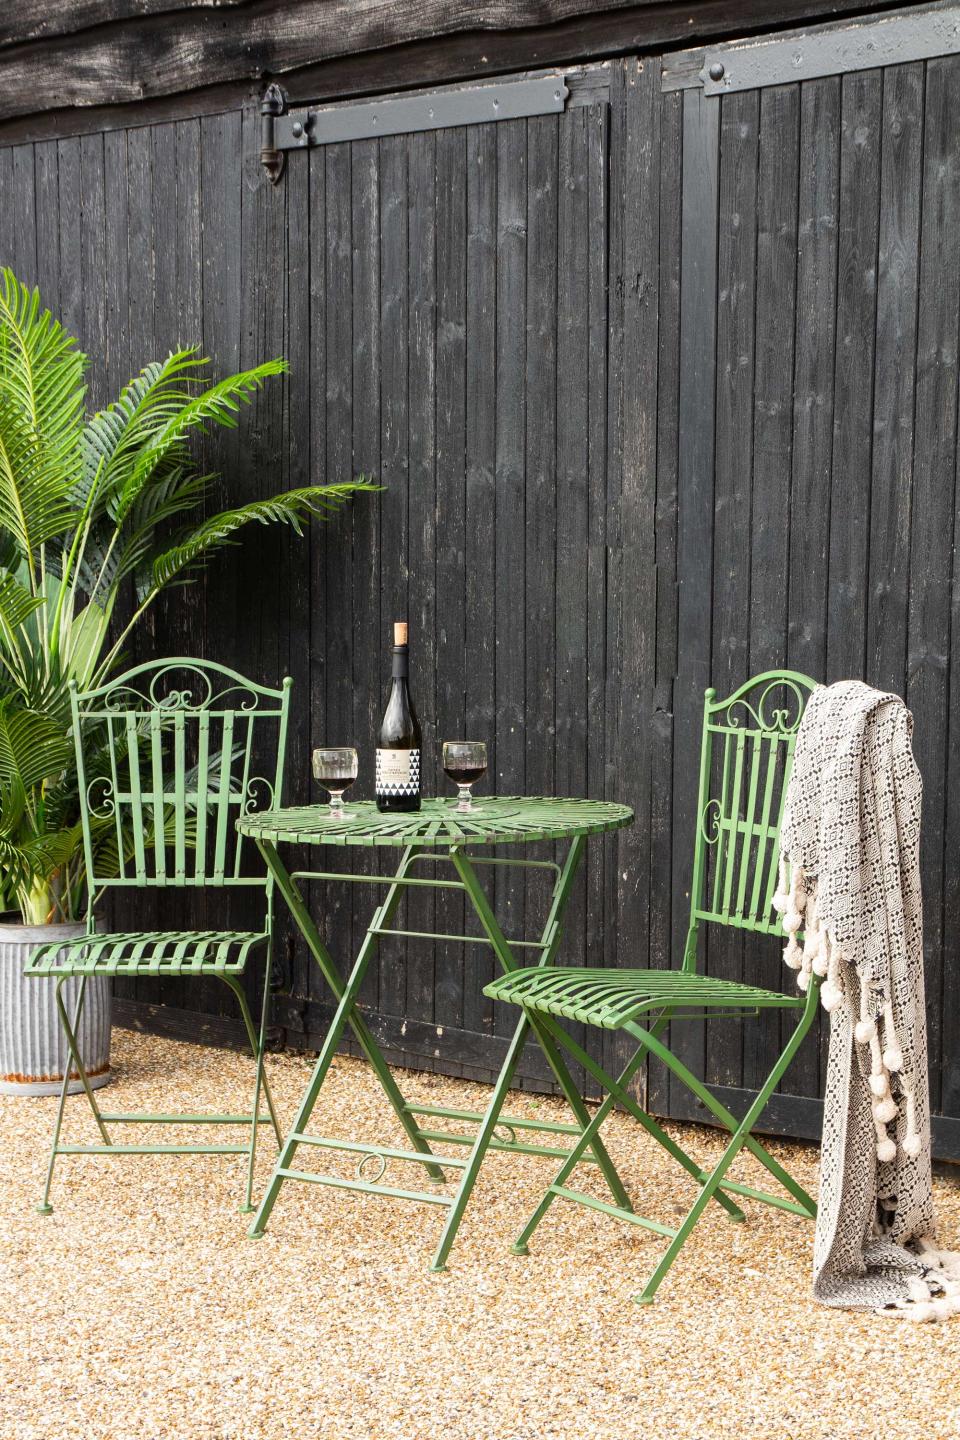 4. Pair a brightly colored bistro set with charcoal tones